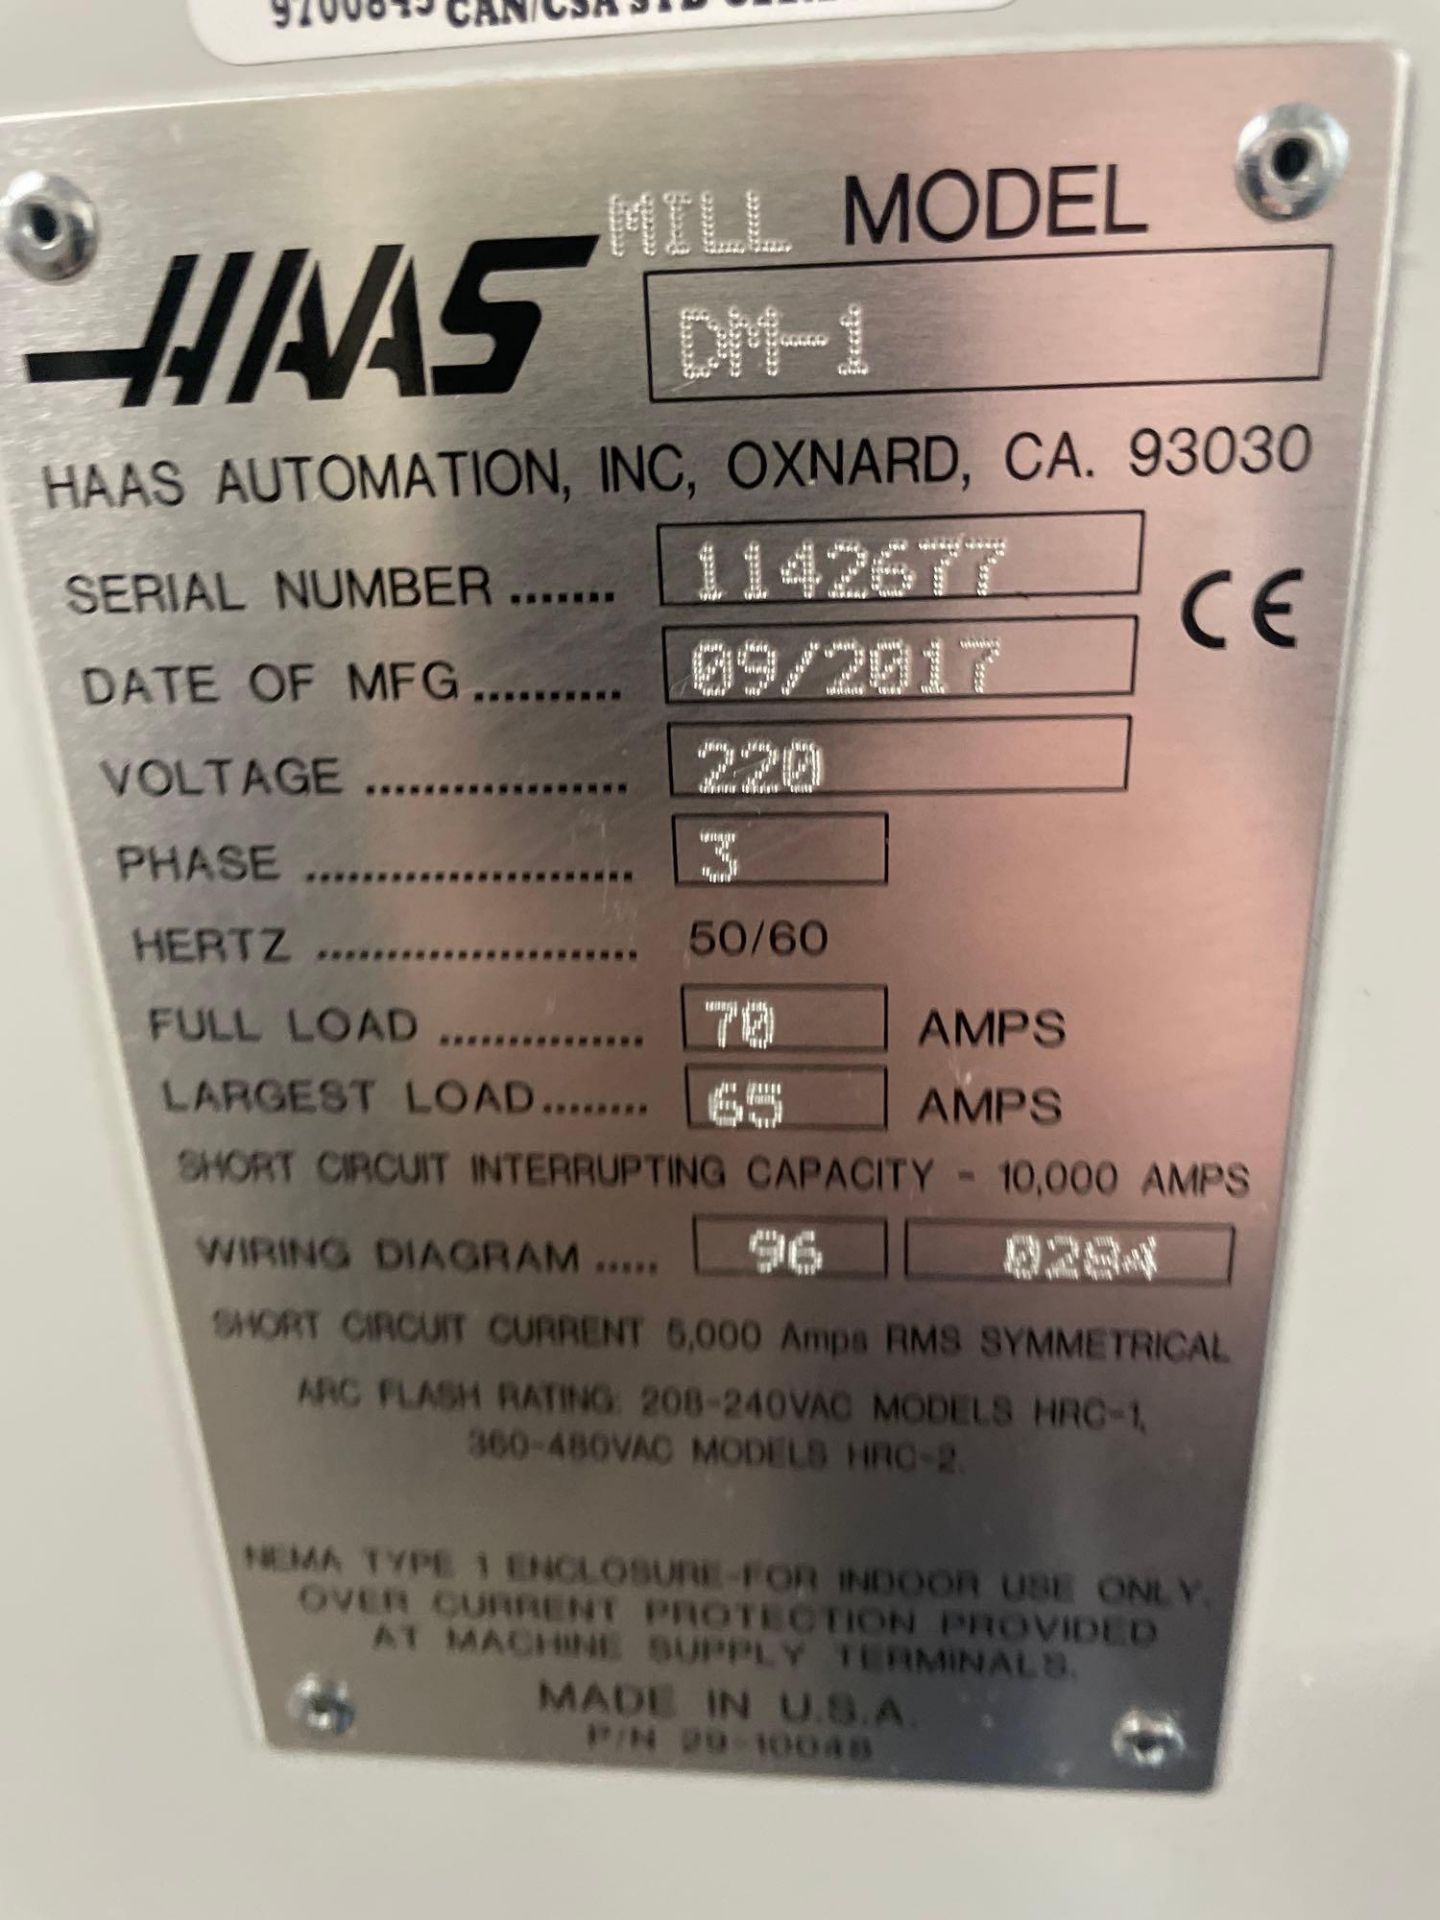 HAAS DM-1 Vertical Machining Center, 4th- Axis Ready, 20” x 16” x 15.5” Trvls., 15k RPM, New 2017 - Image 10 of 12